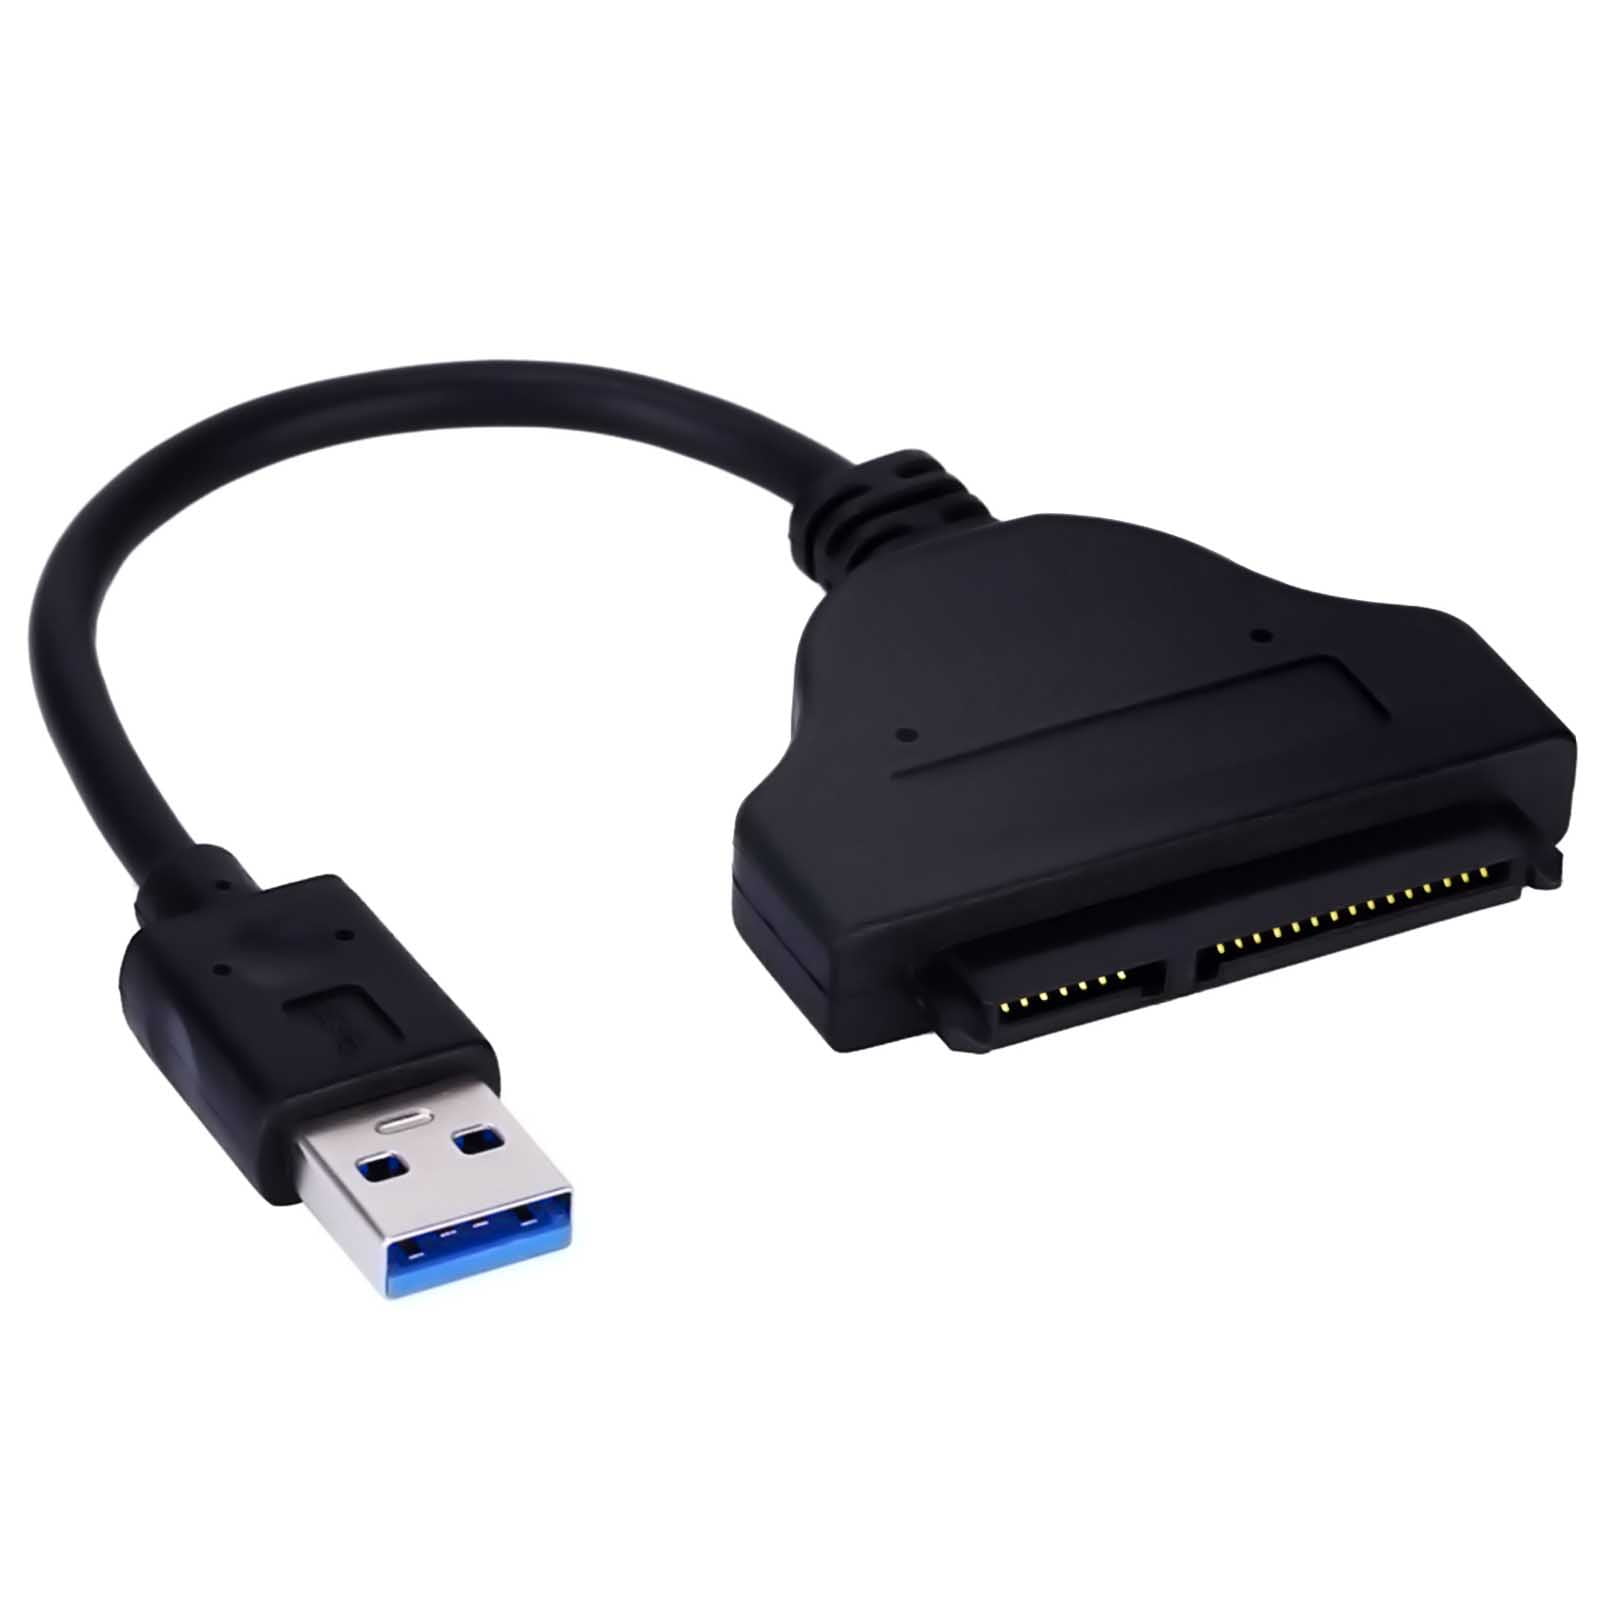 TSV USB to SATA Adapter Cable Compatible for 2.5" Drives Converter Cable -